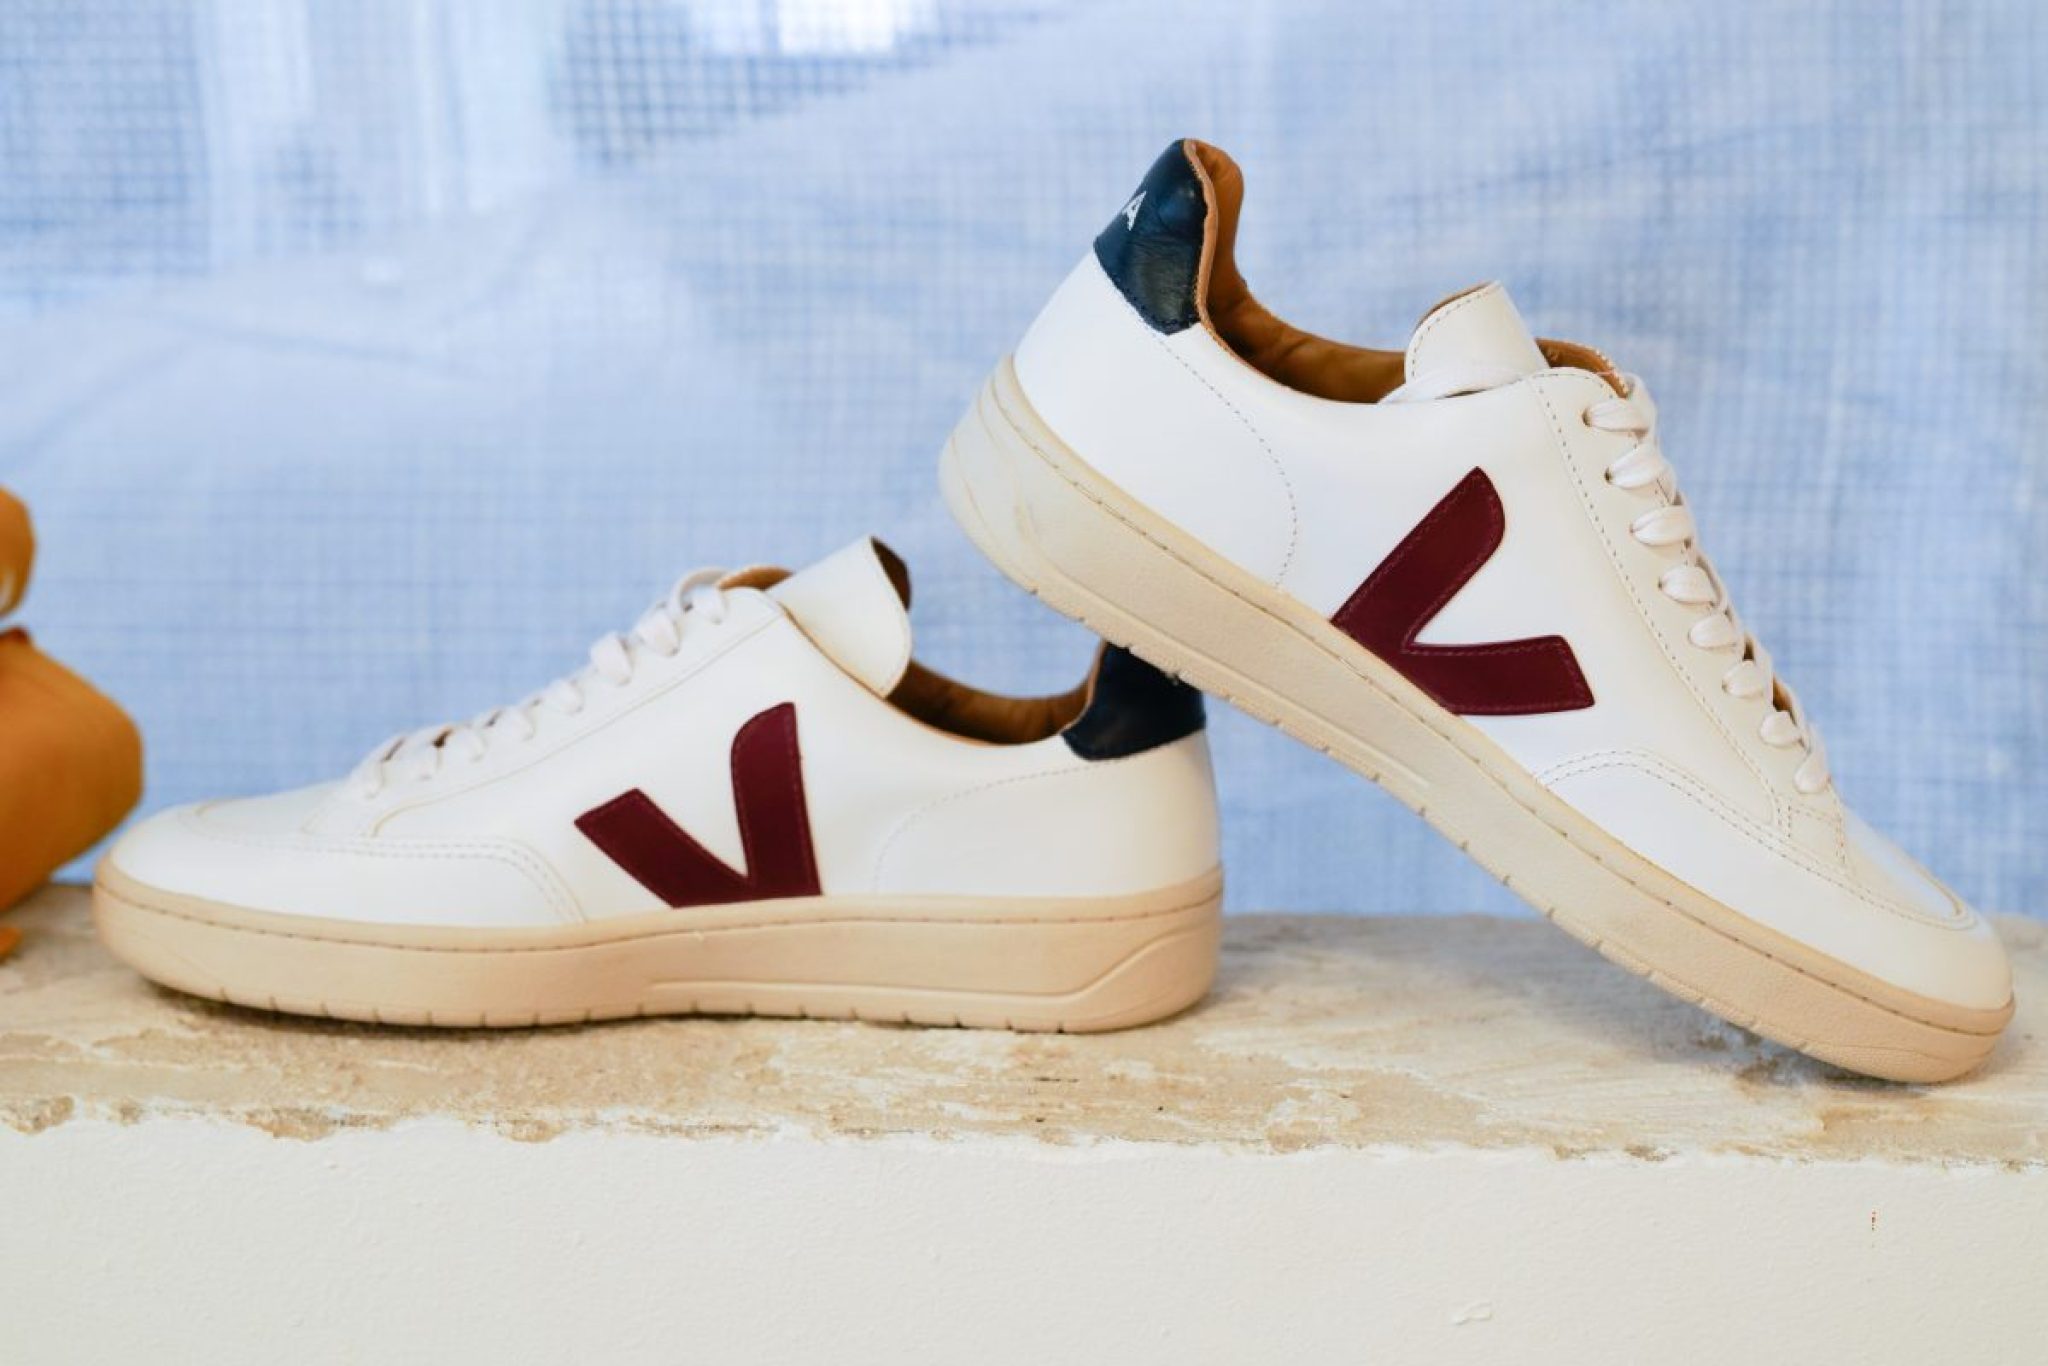 Veja Shoe Size Chart Are VEJA Shoes True To Size? The Shoe Box NYC